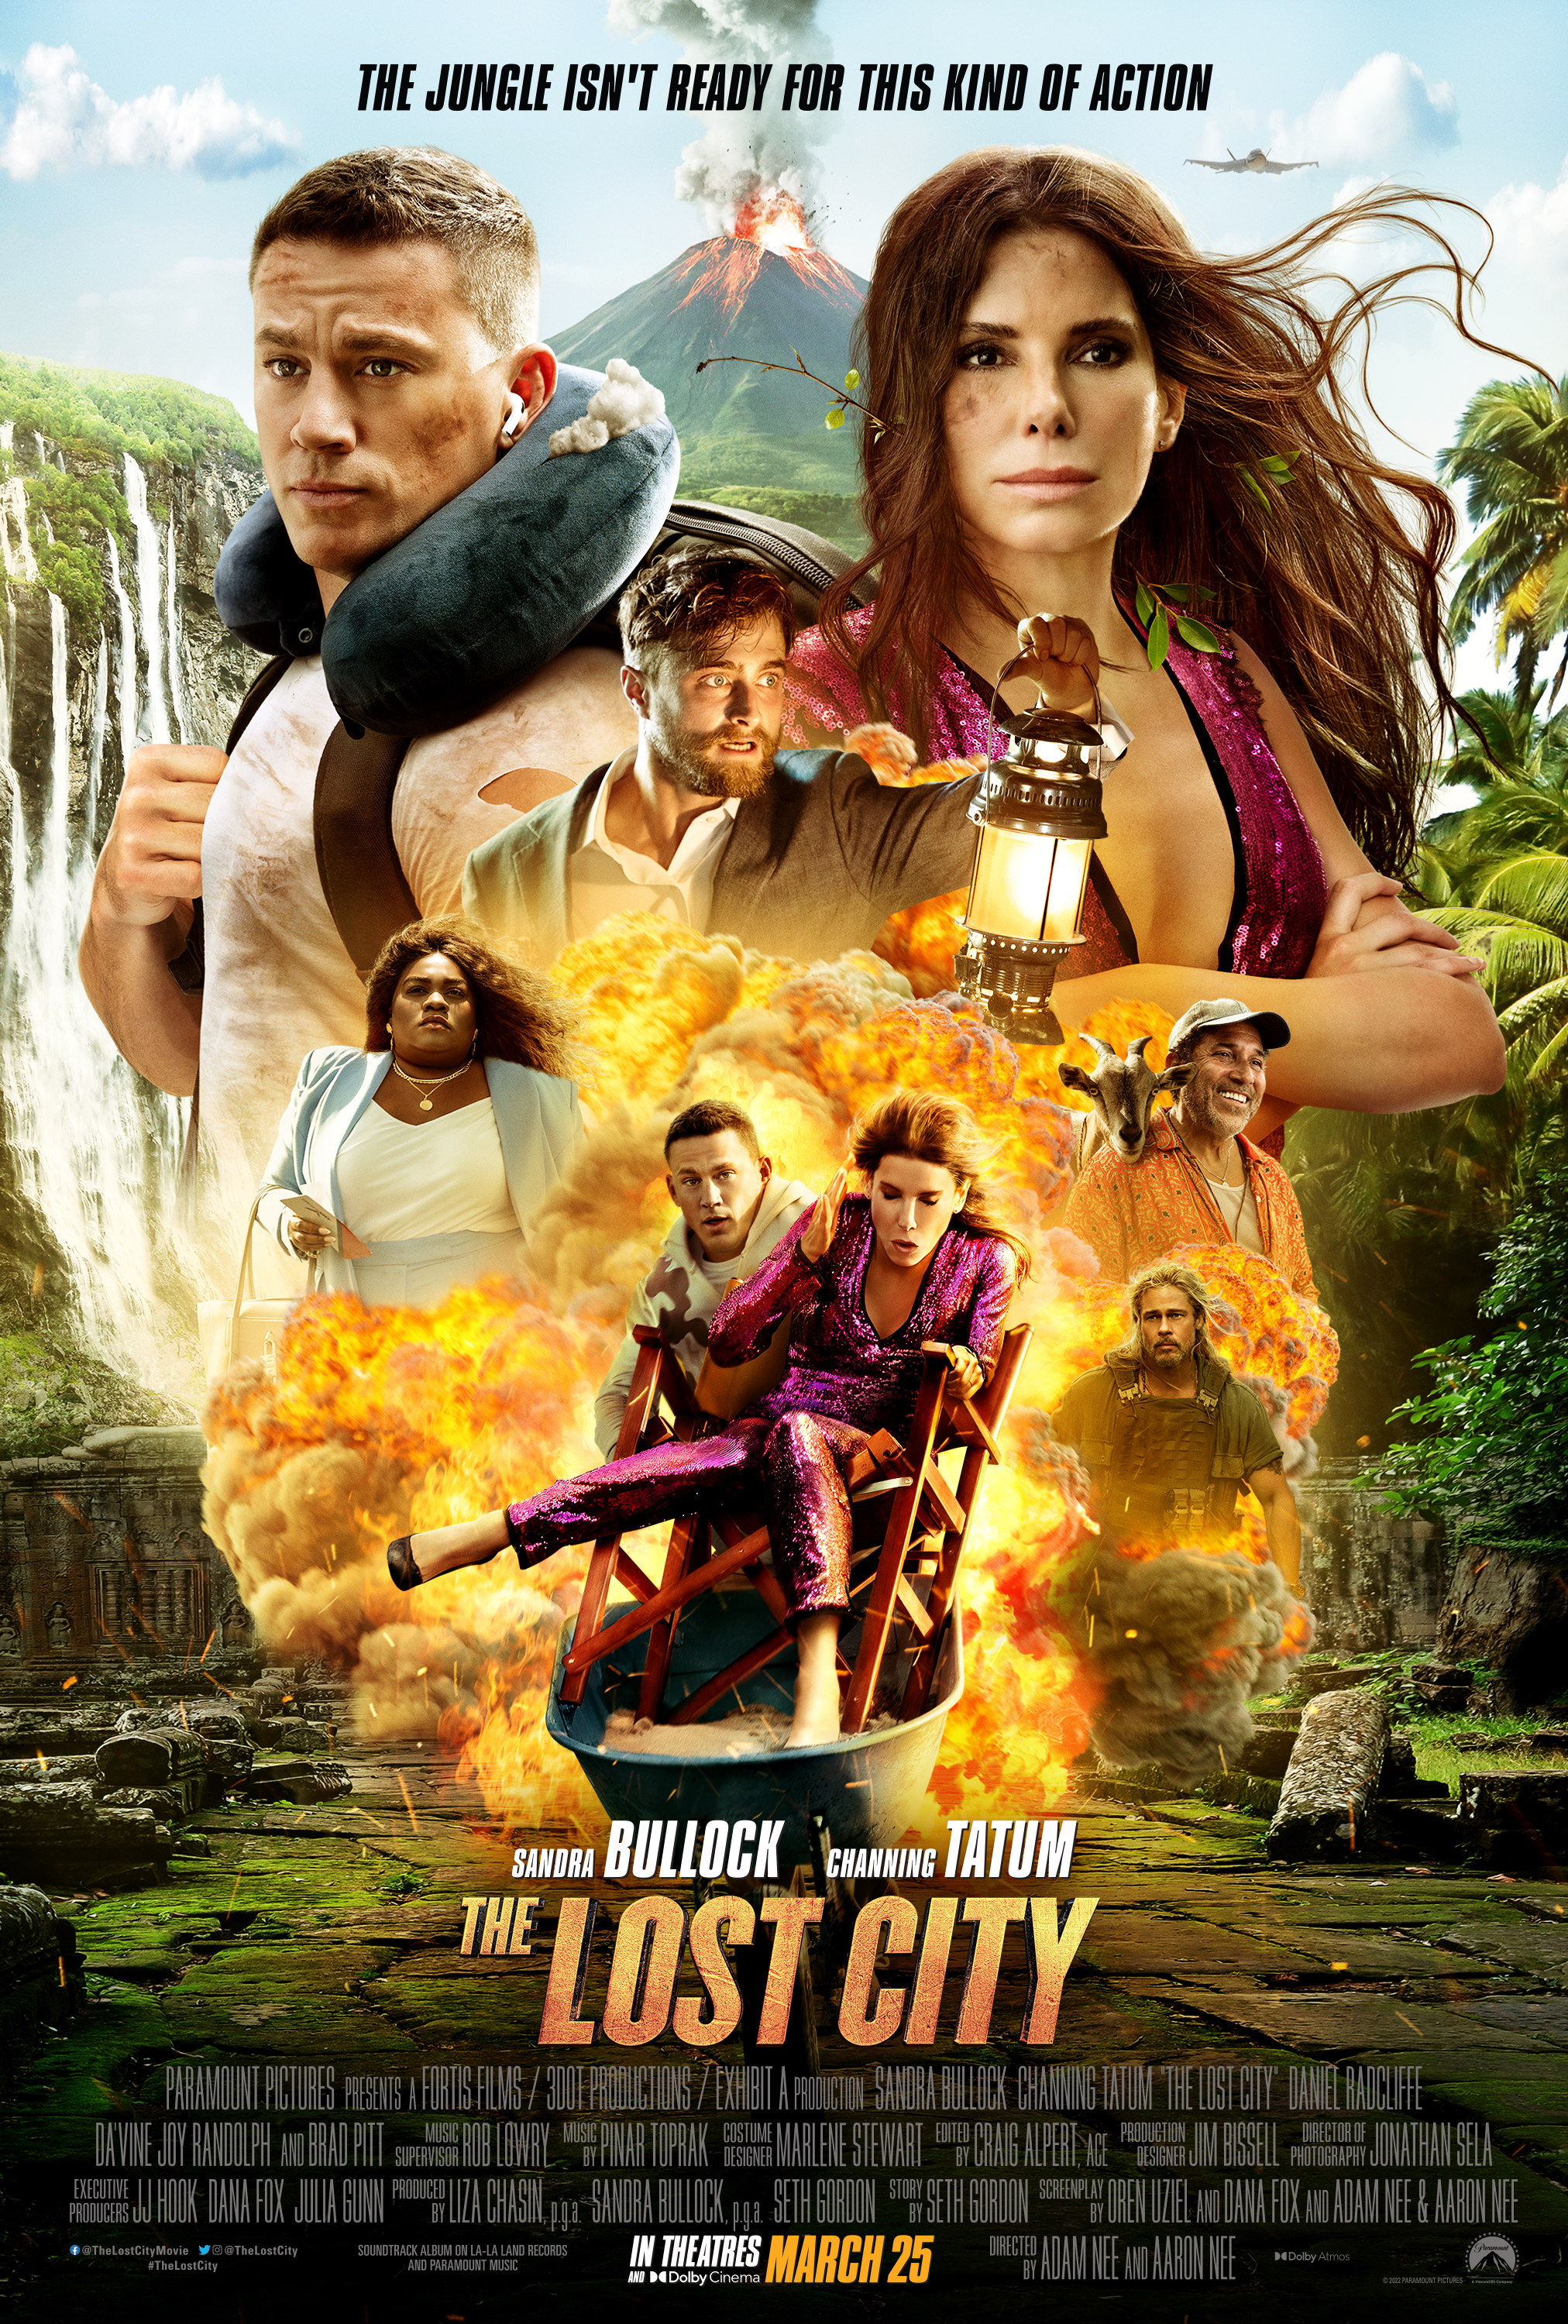 The Lost City Movie Release Date, Cast, and Reviews.